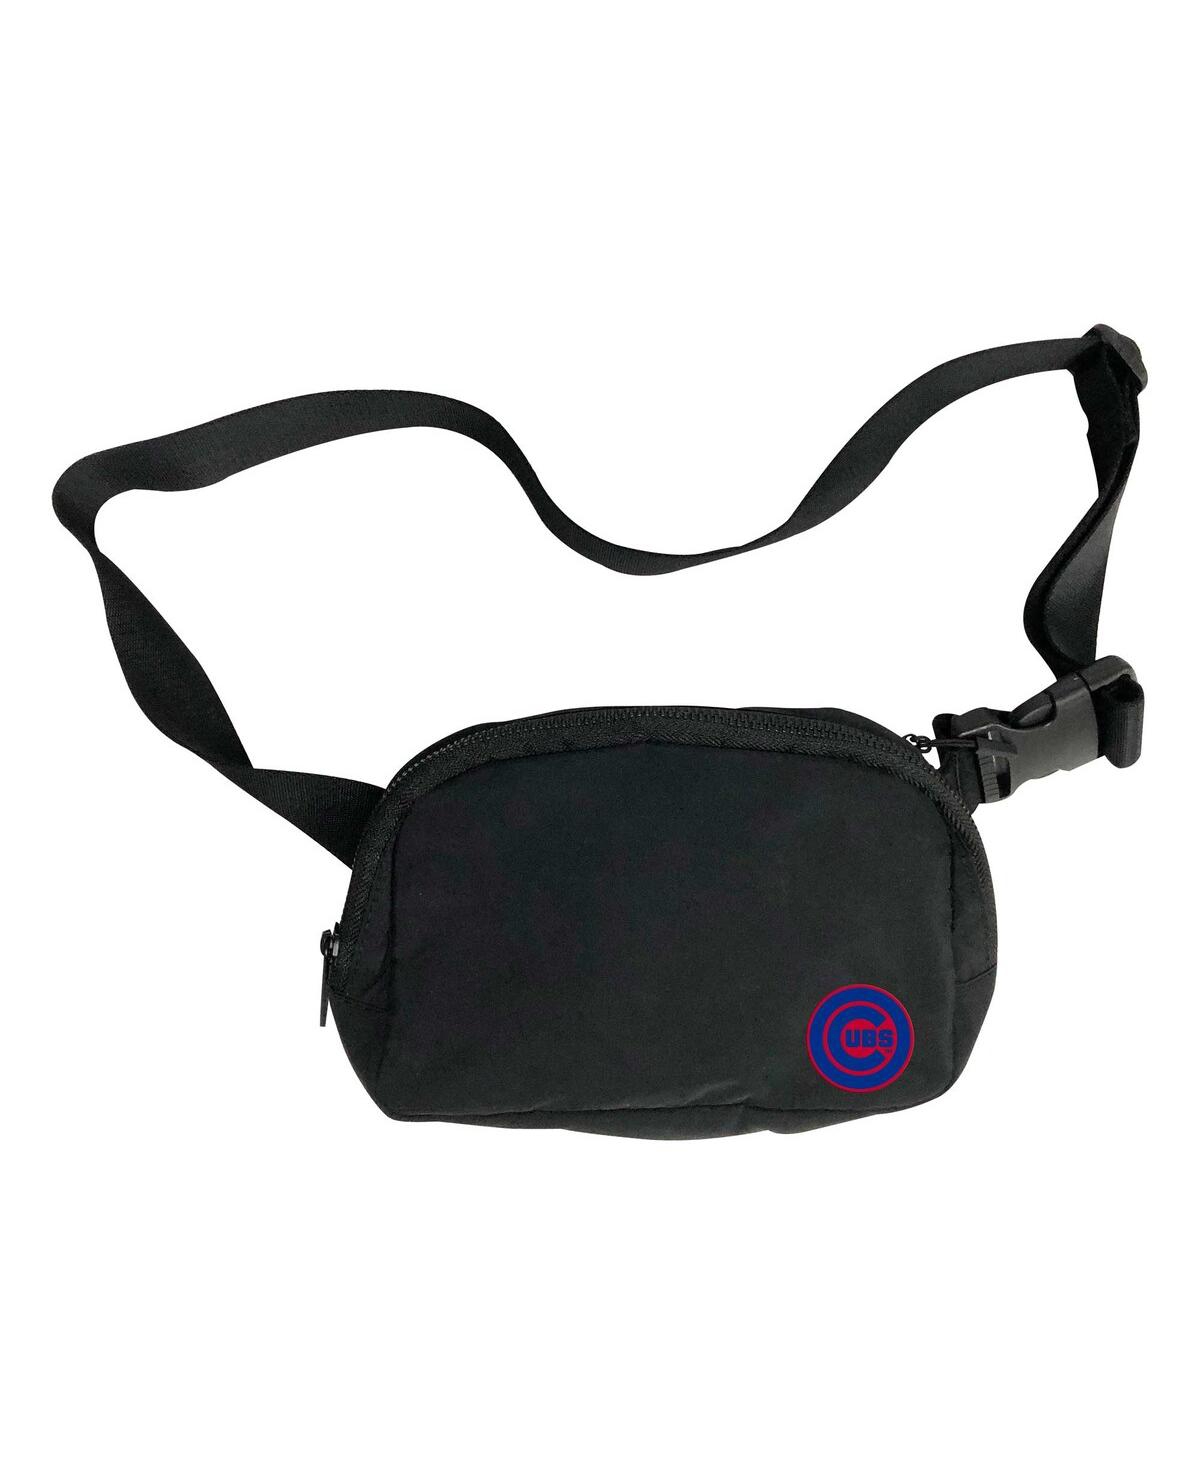 Men's and Women's Chicago Cubs Fanny Pack - Black